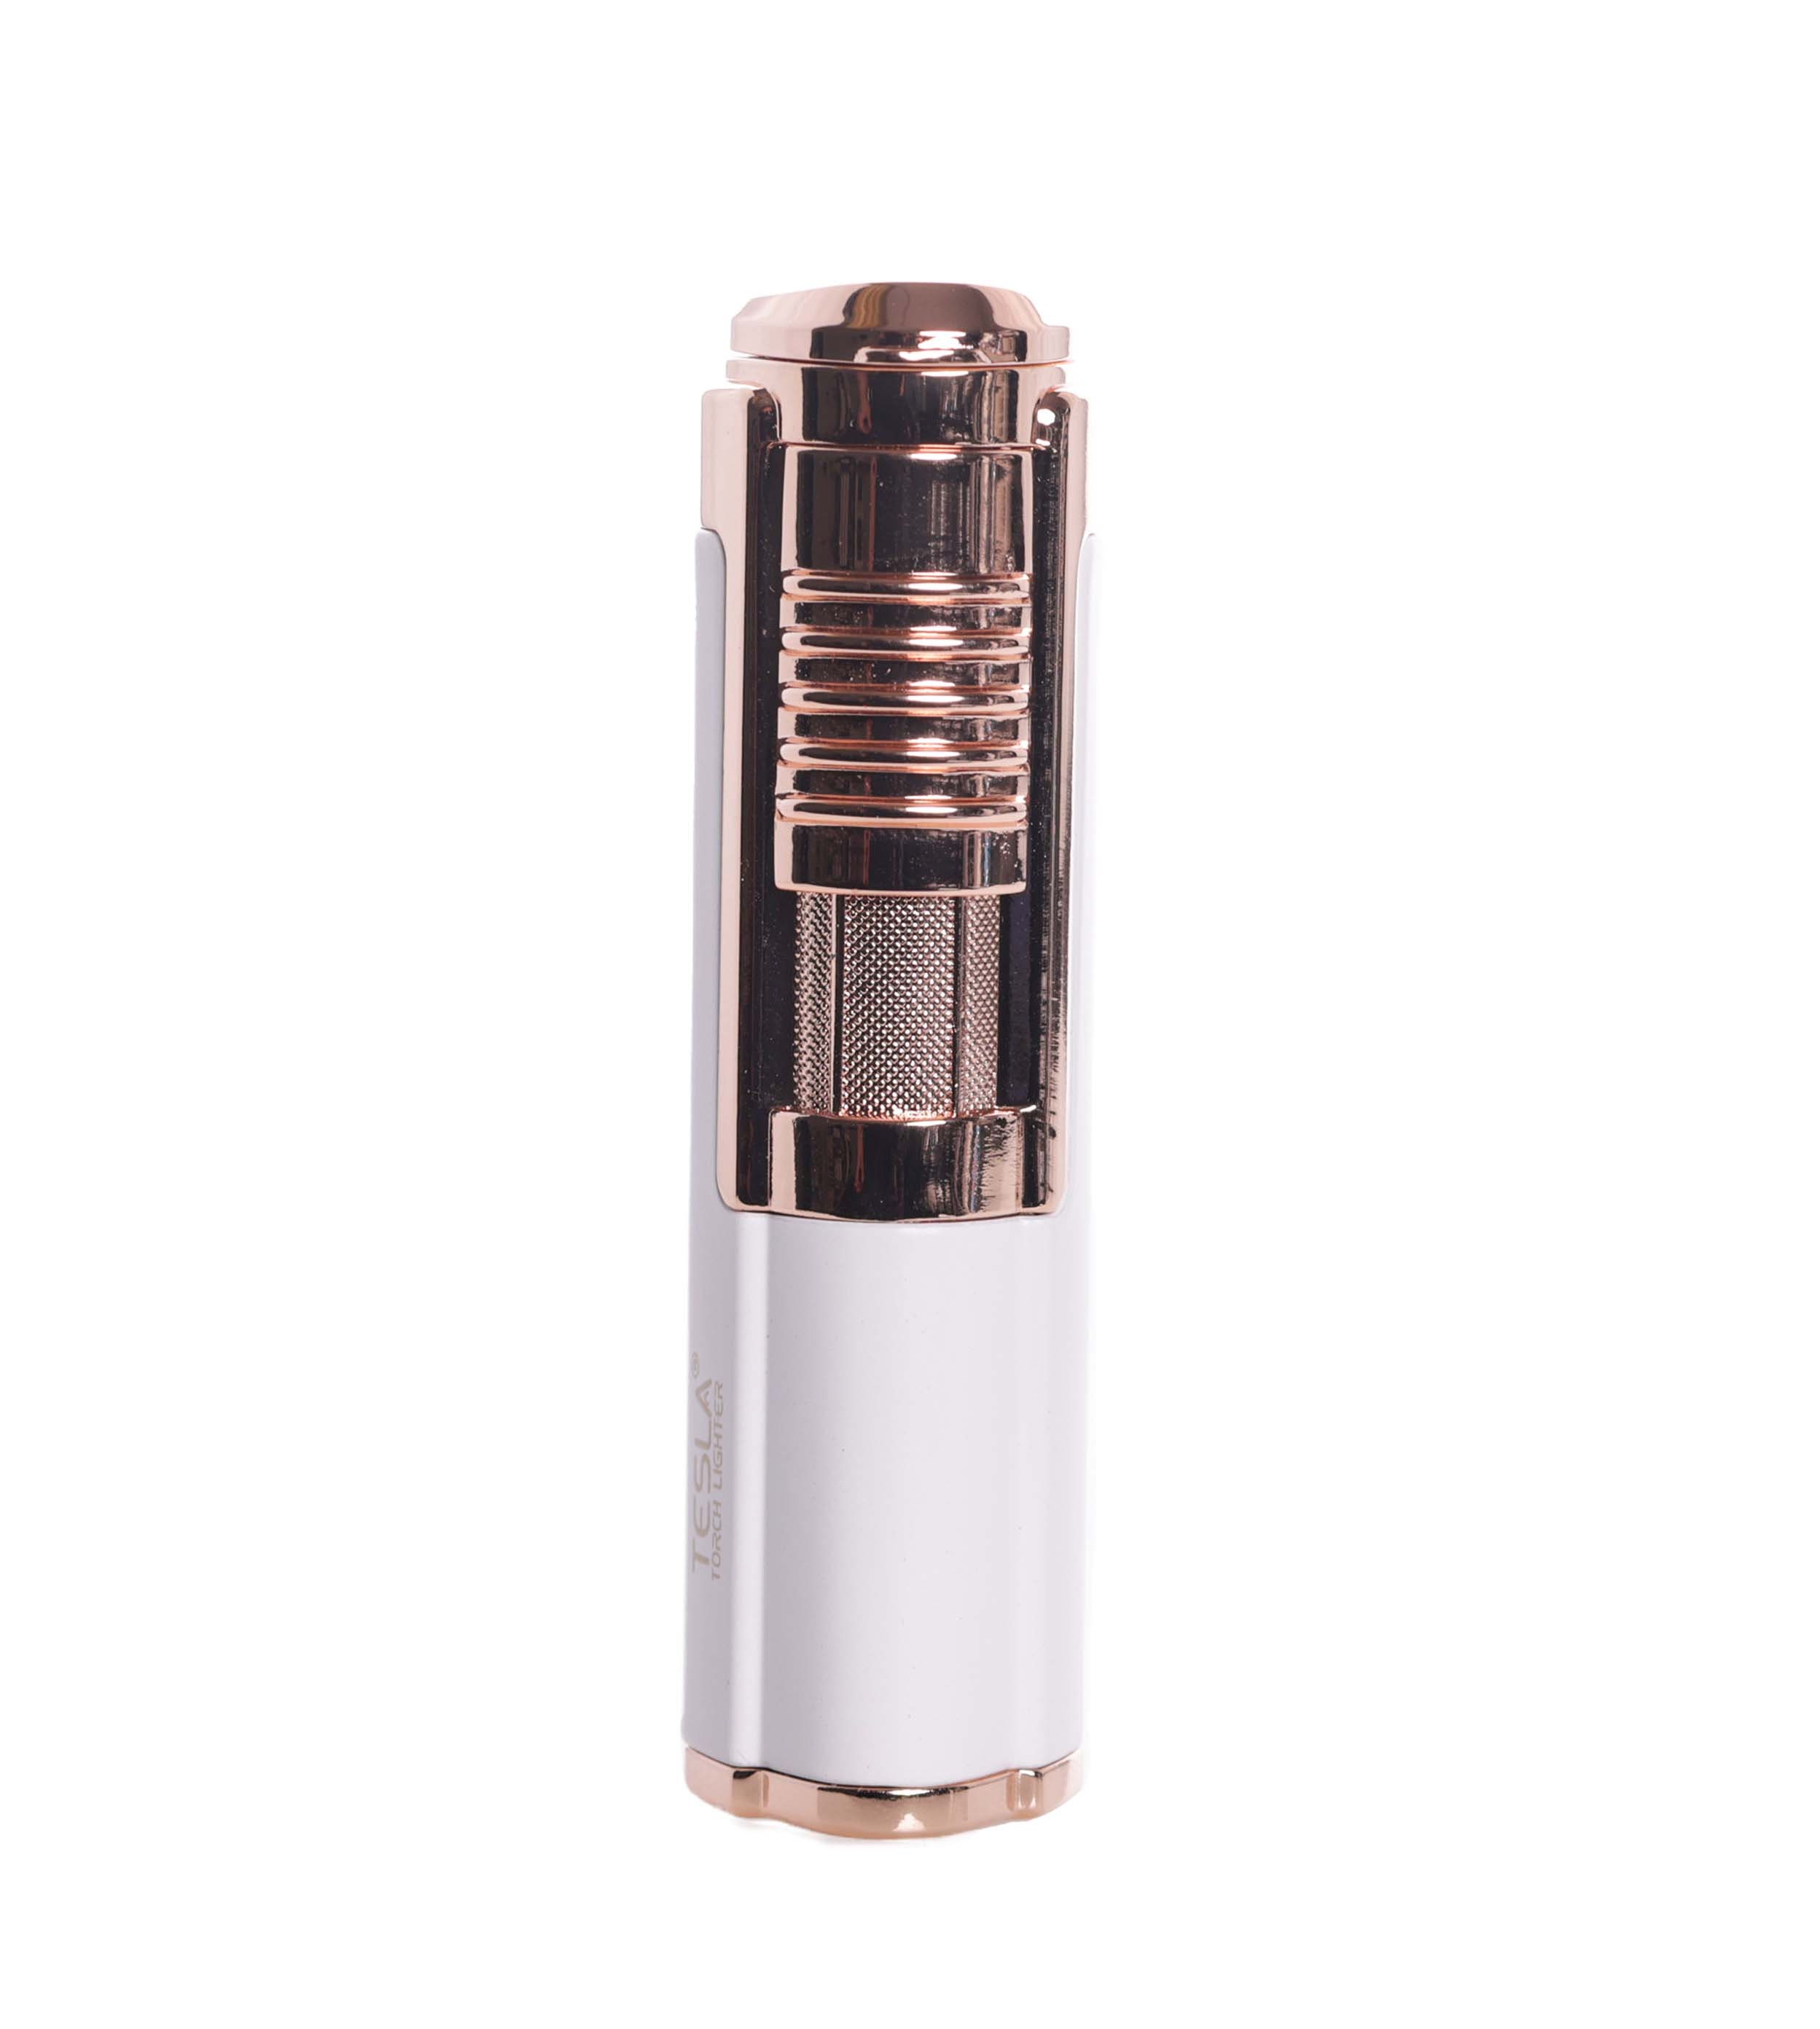 Tesla Coil Lighters Chrome/Stainless Steel Design 45 Degree Single Flame  Adjustable Butane Torch Lighter With Cigar Punch - Assorted Colors -  Display